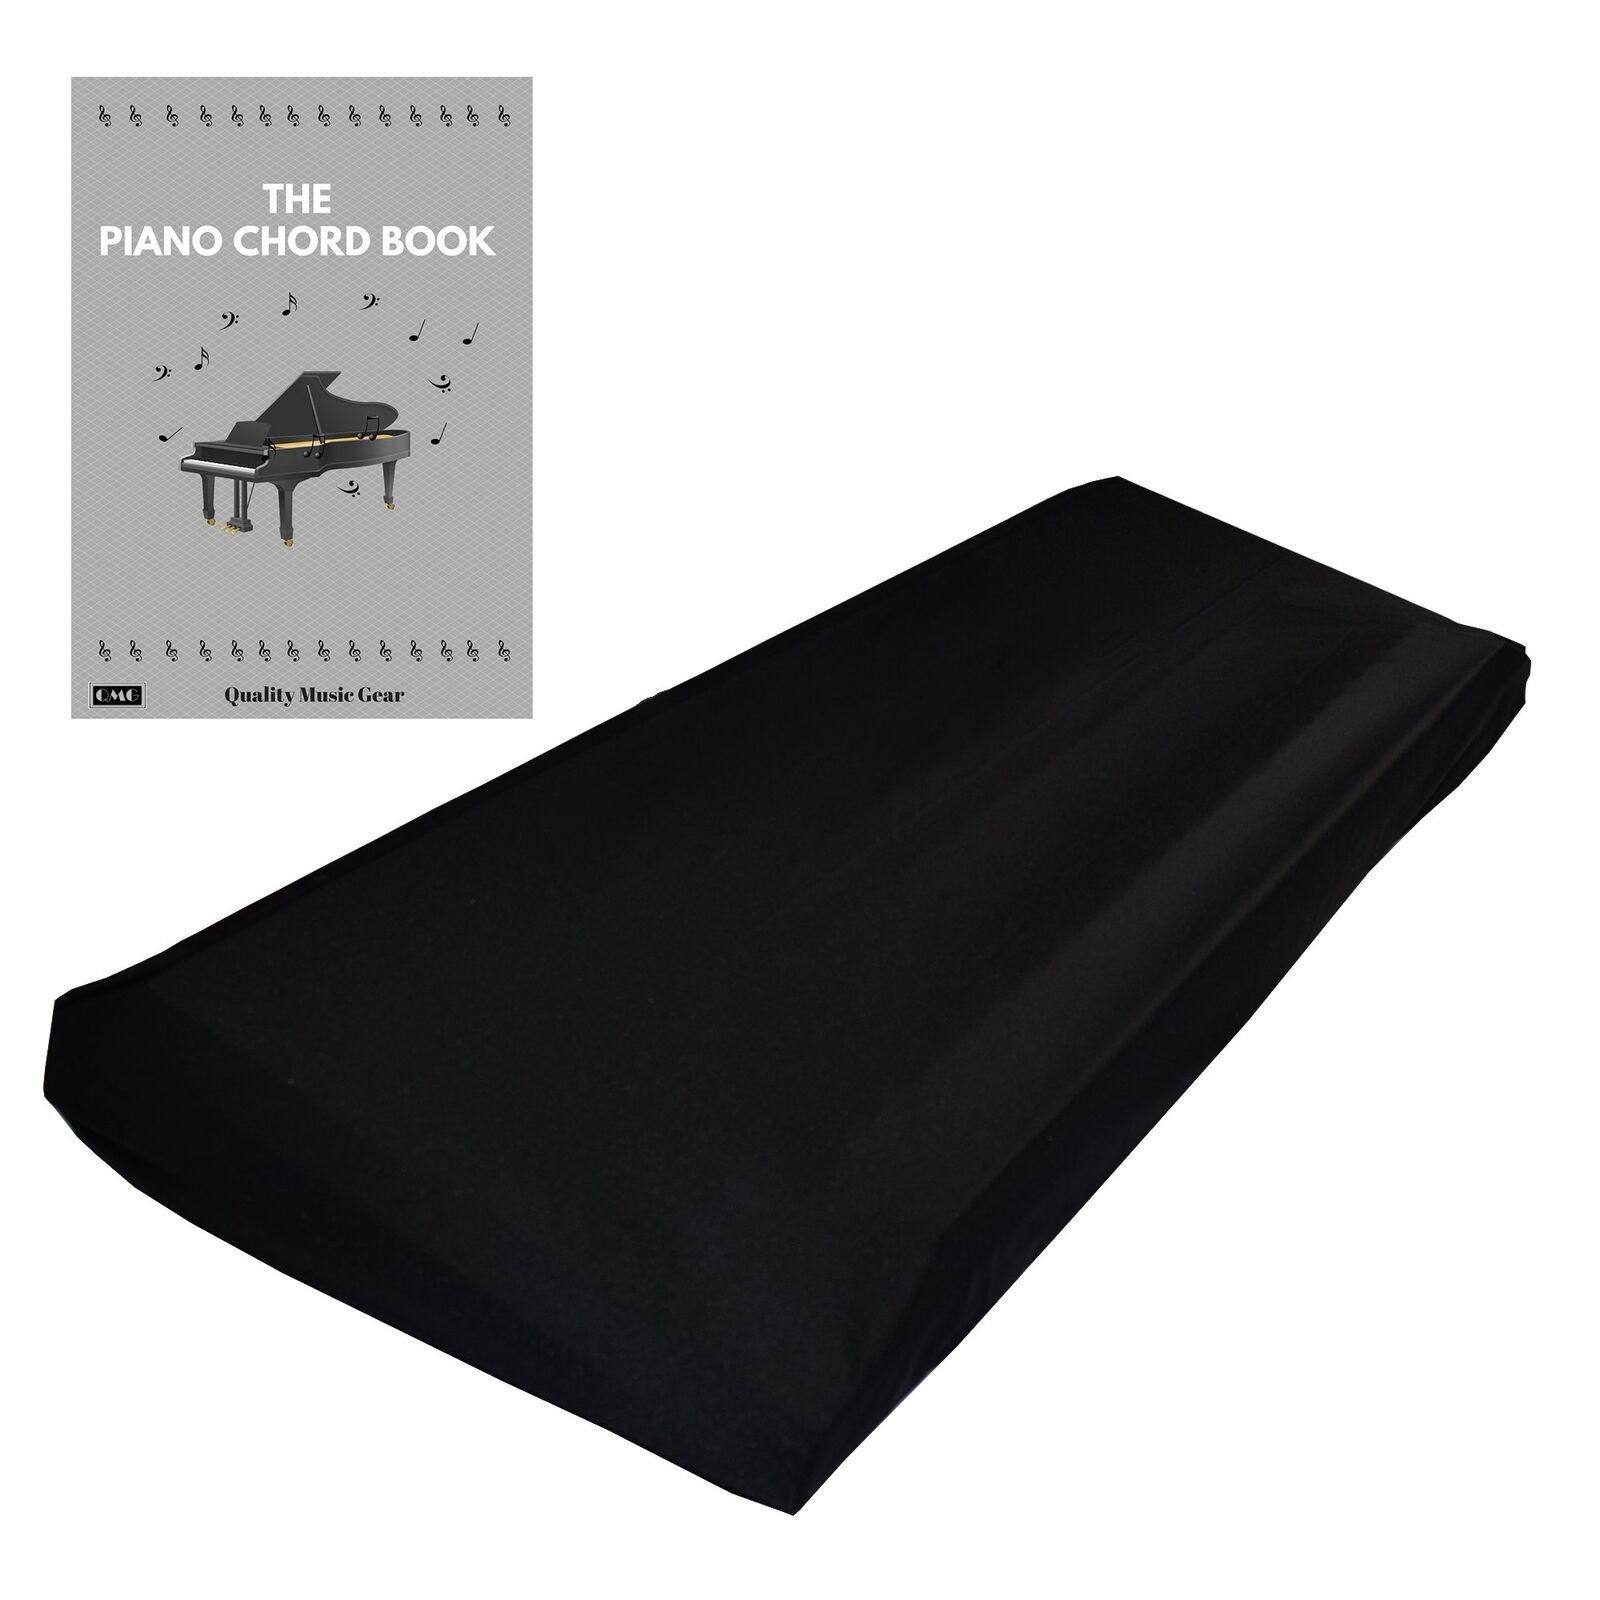 Stretchable Keyboard Dust Cover for 88 Key-keyboard: Best for all Digital Pia...